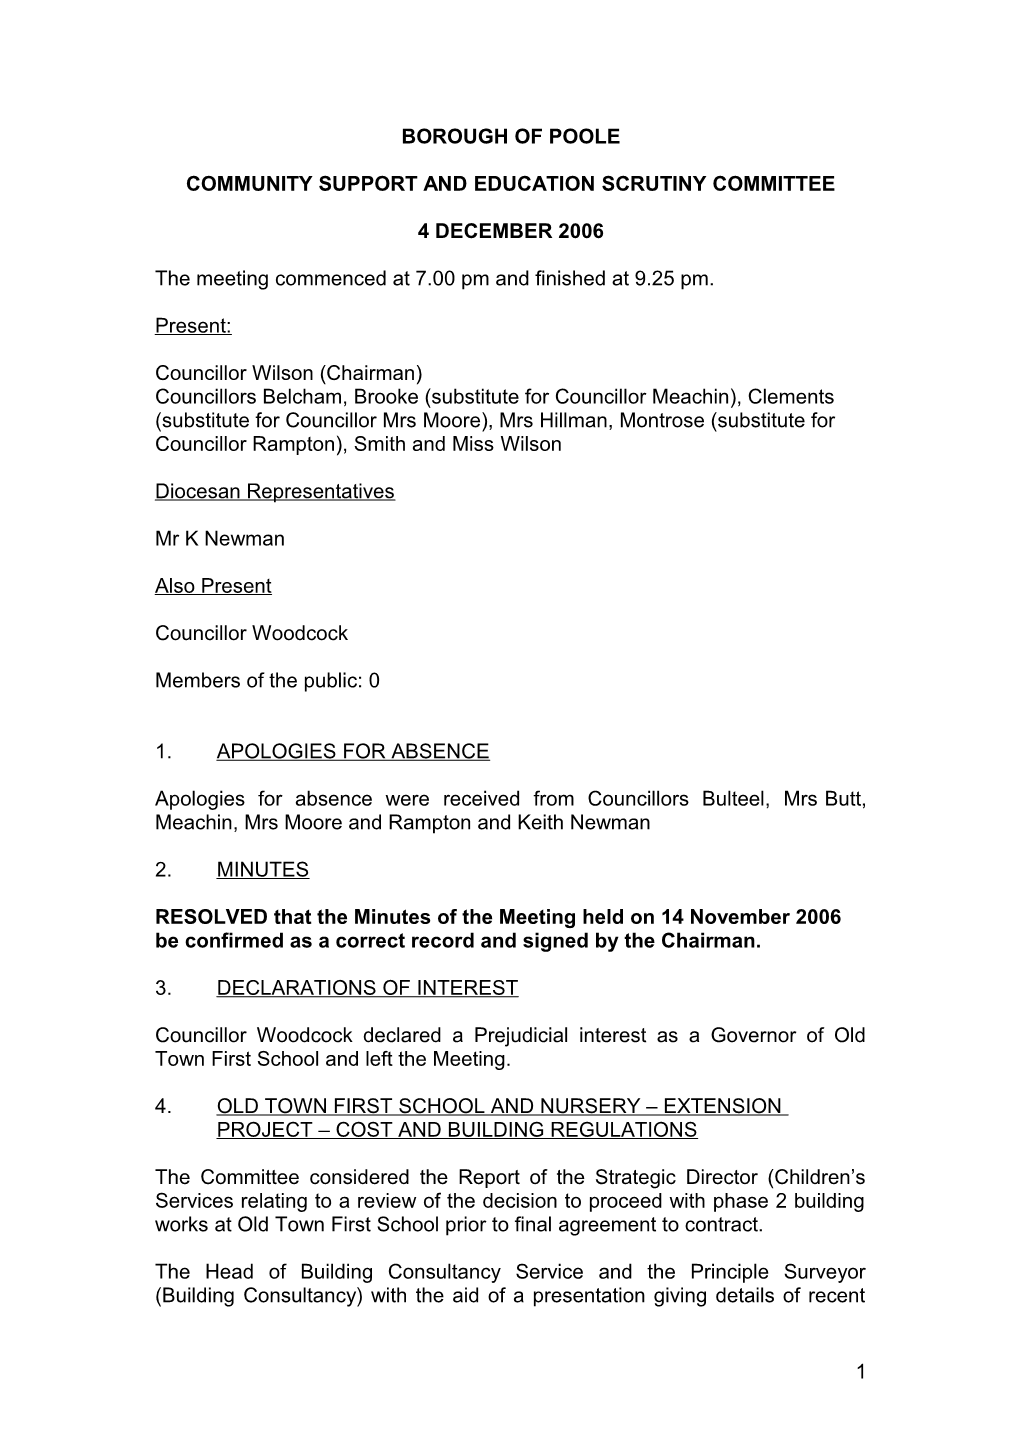 Minutes of Community Support and Education Scrutiny Committee 4 December 2006